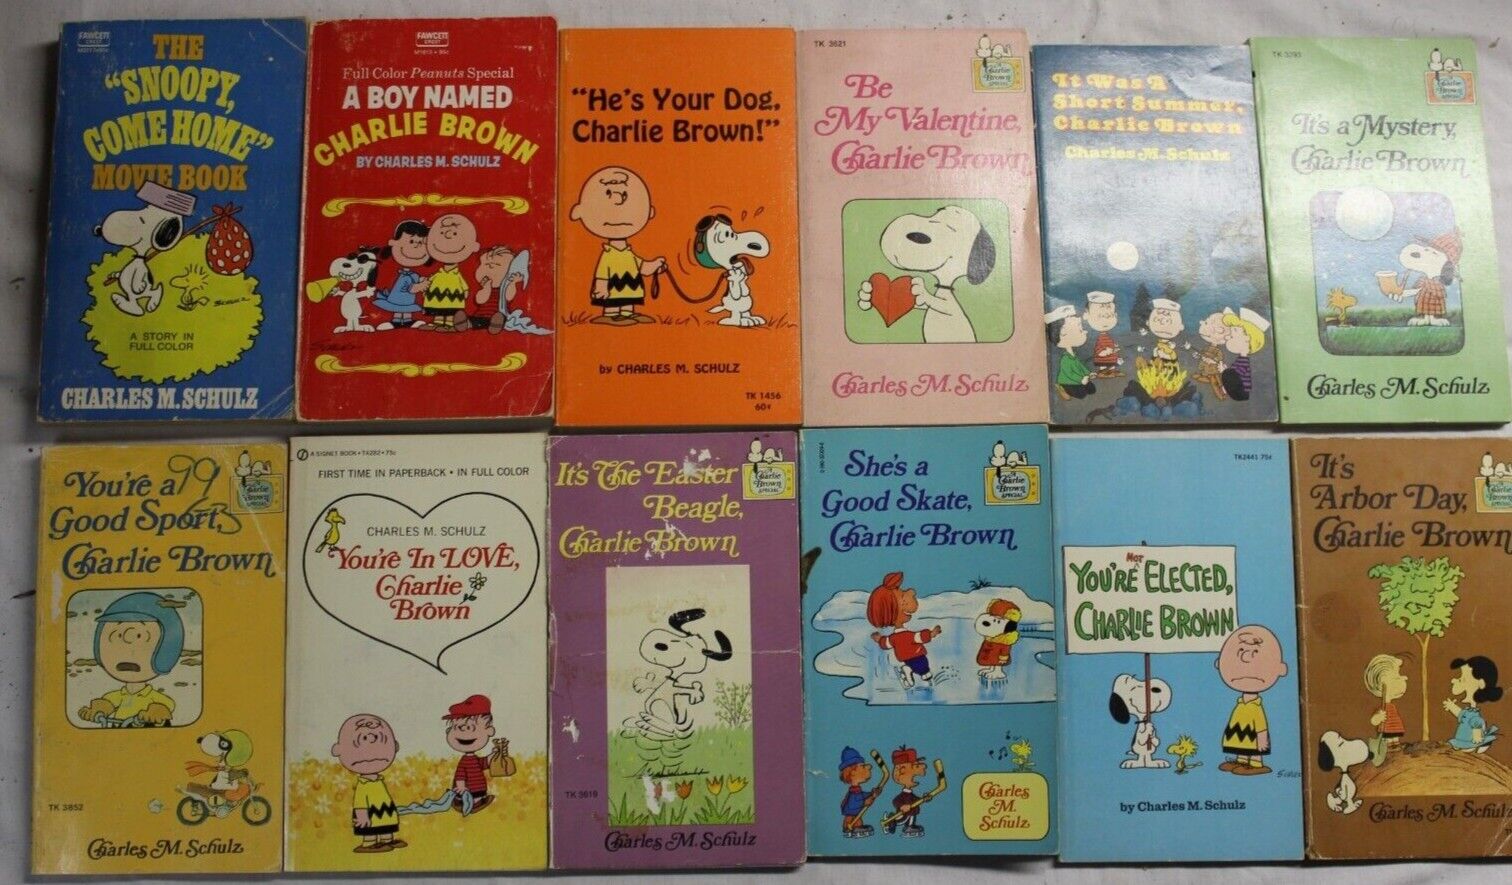 PEANUTS Snoopy TV Special Book Collection 35 books hardcover & paperback